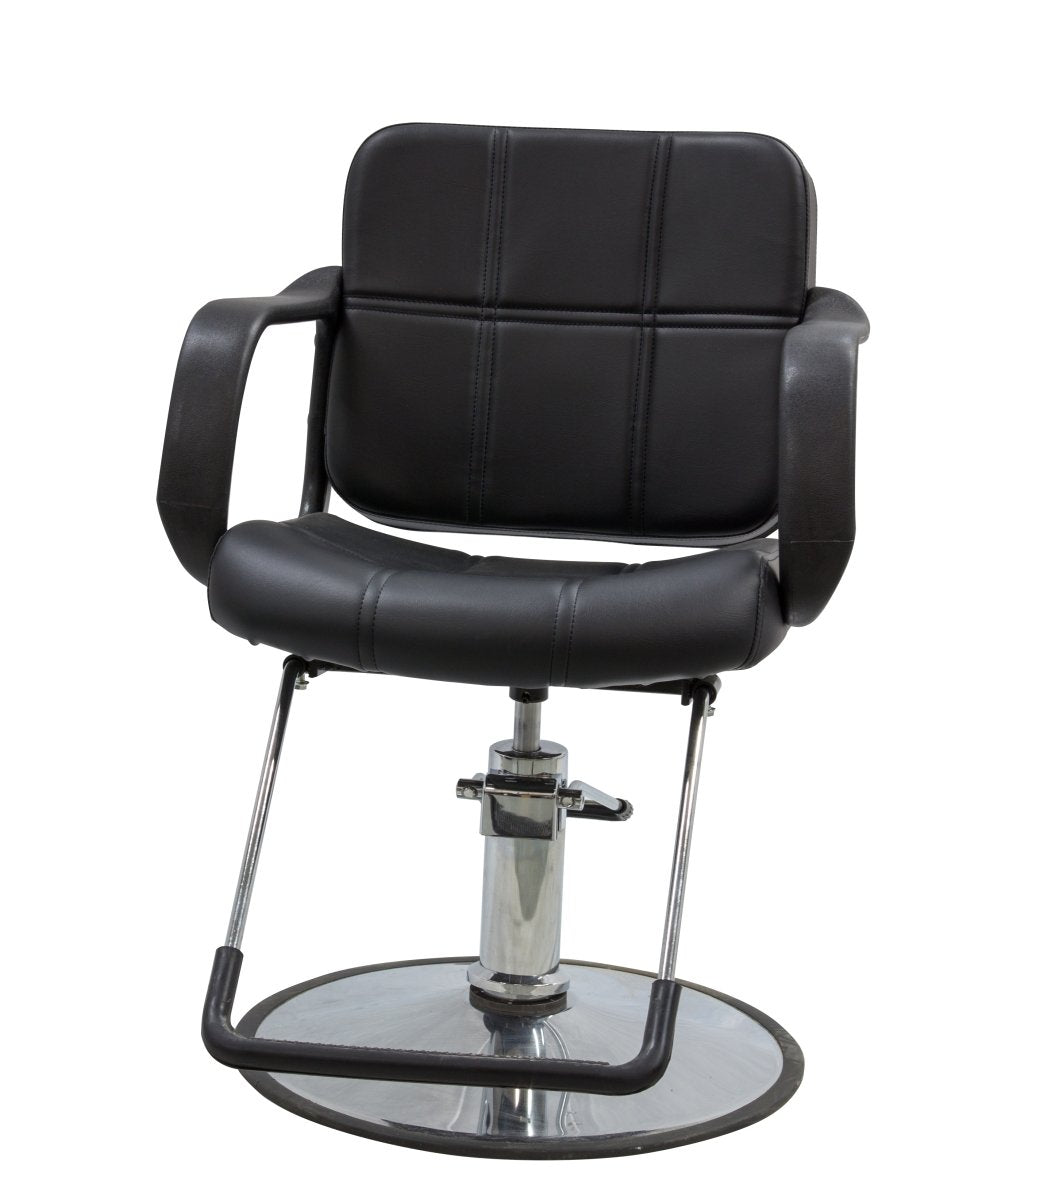 Advance All Purpose Hydraulic Styling Chair - SC 611 - GreenLife-Styling Chair